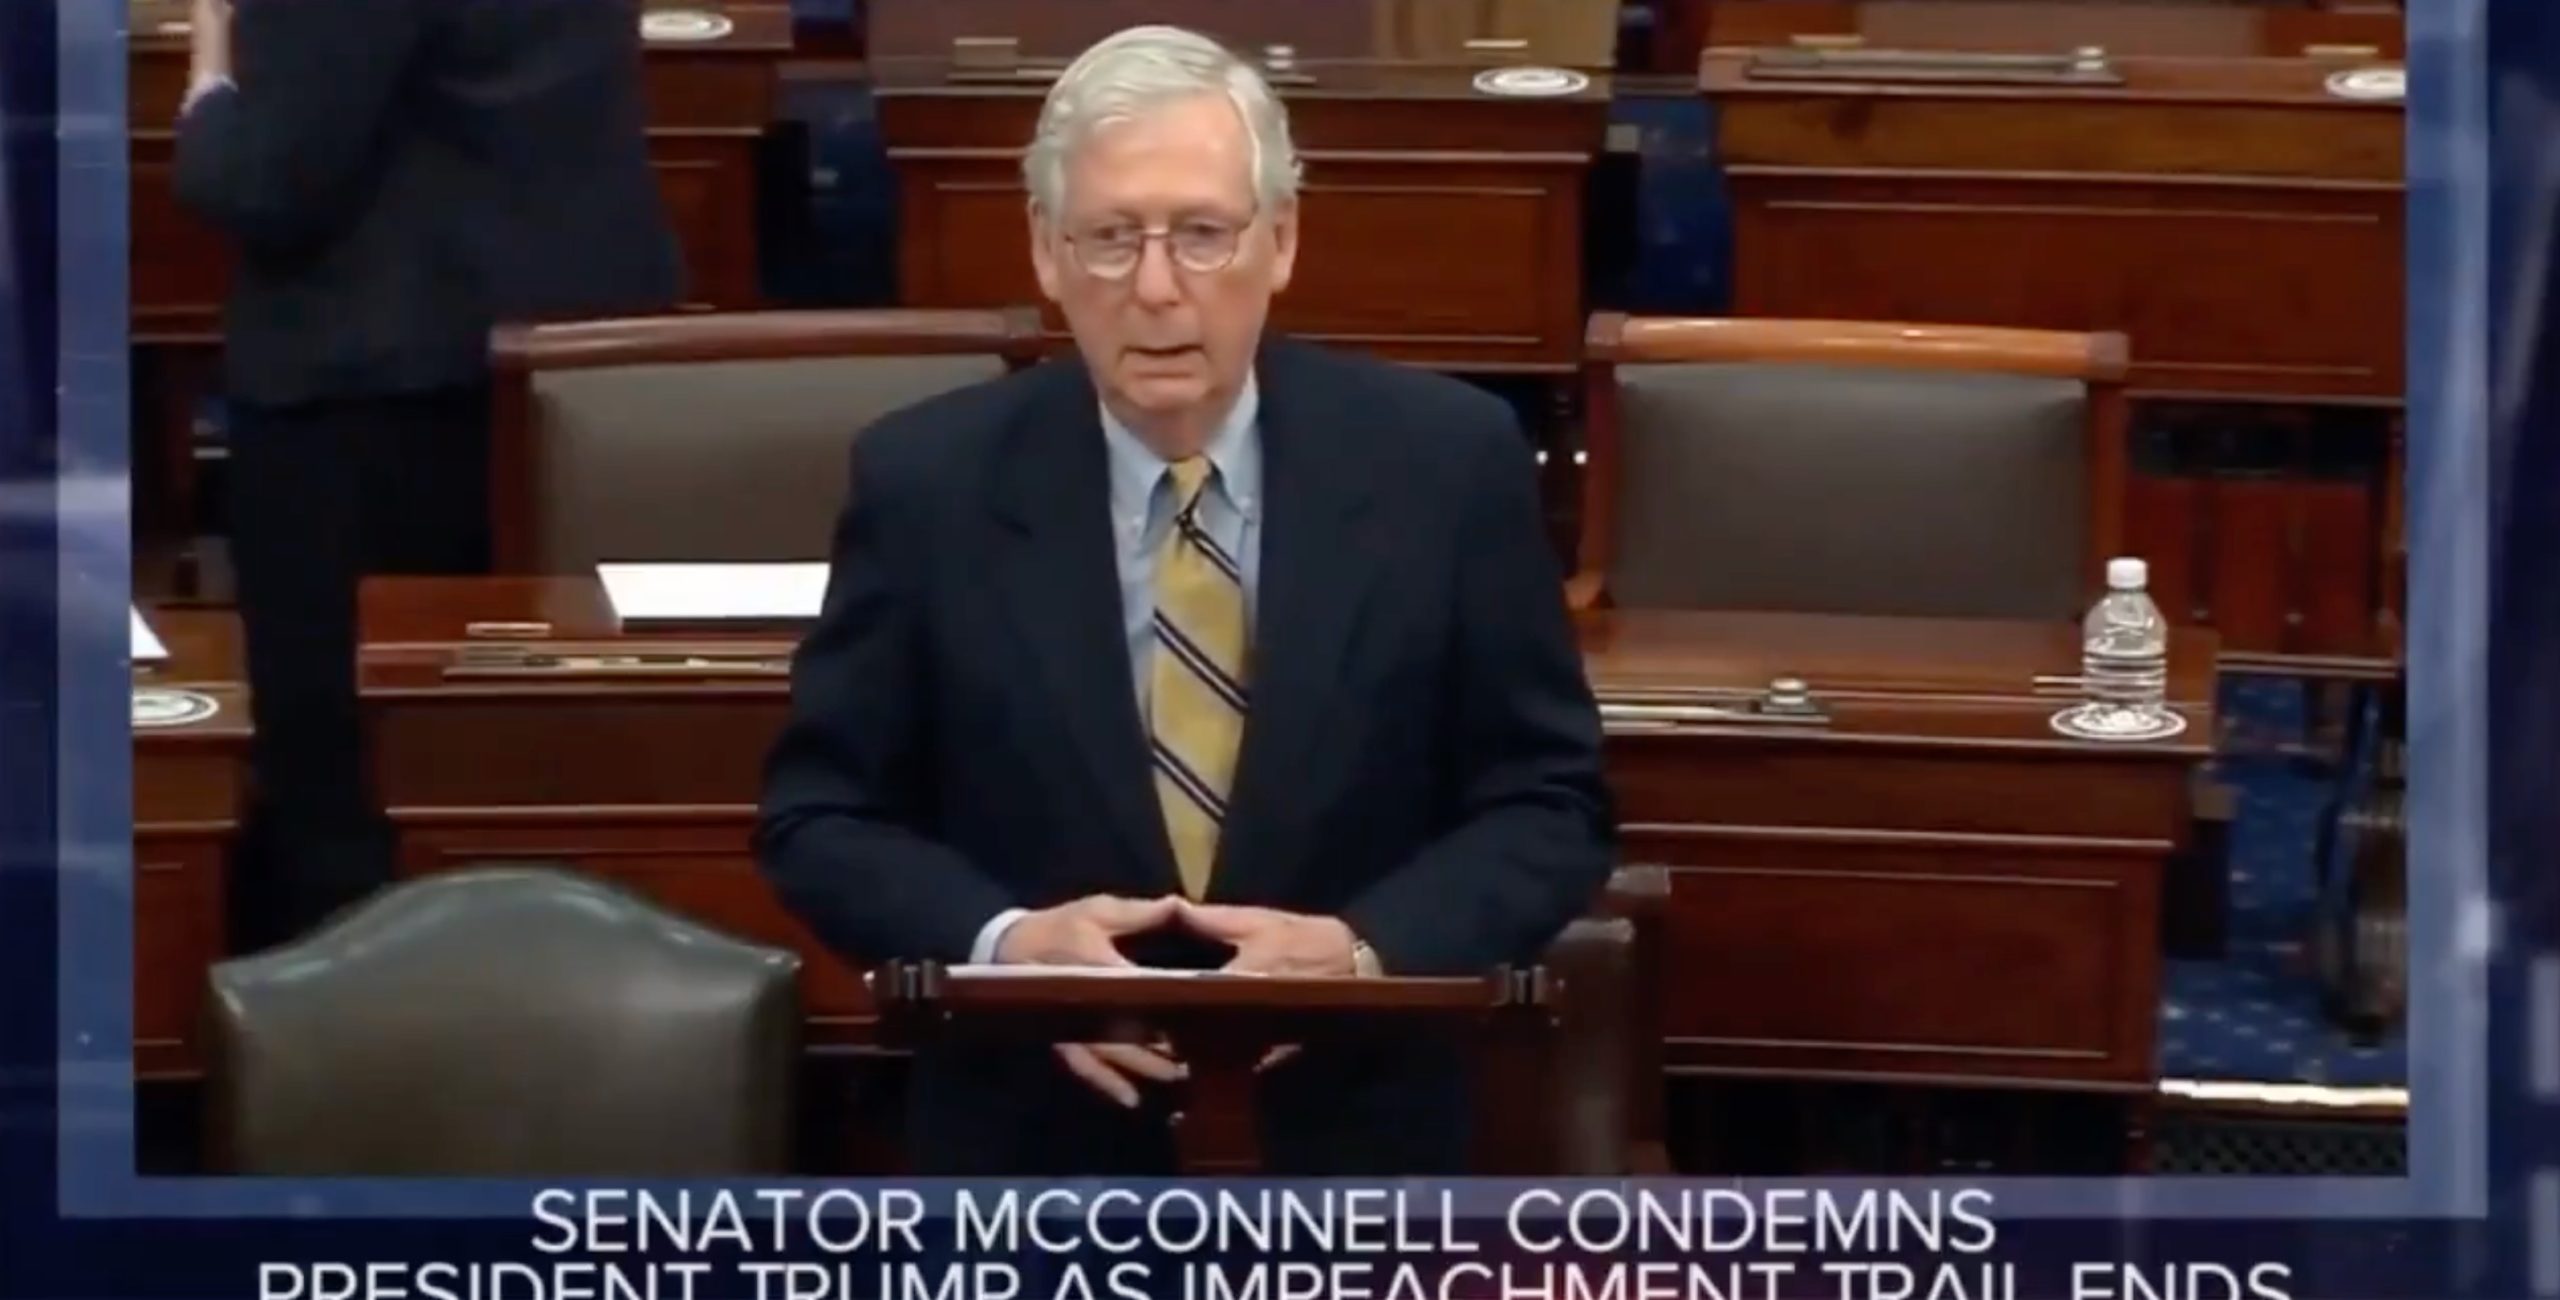 Was Mitch McConnell flashing "Masonic hand signs" during a recent speech?